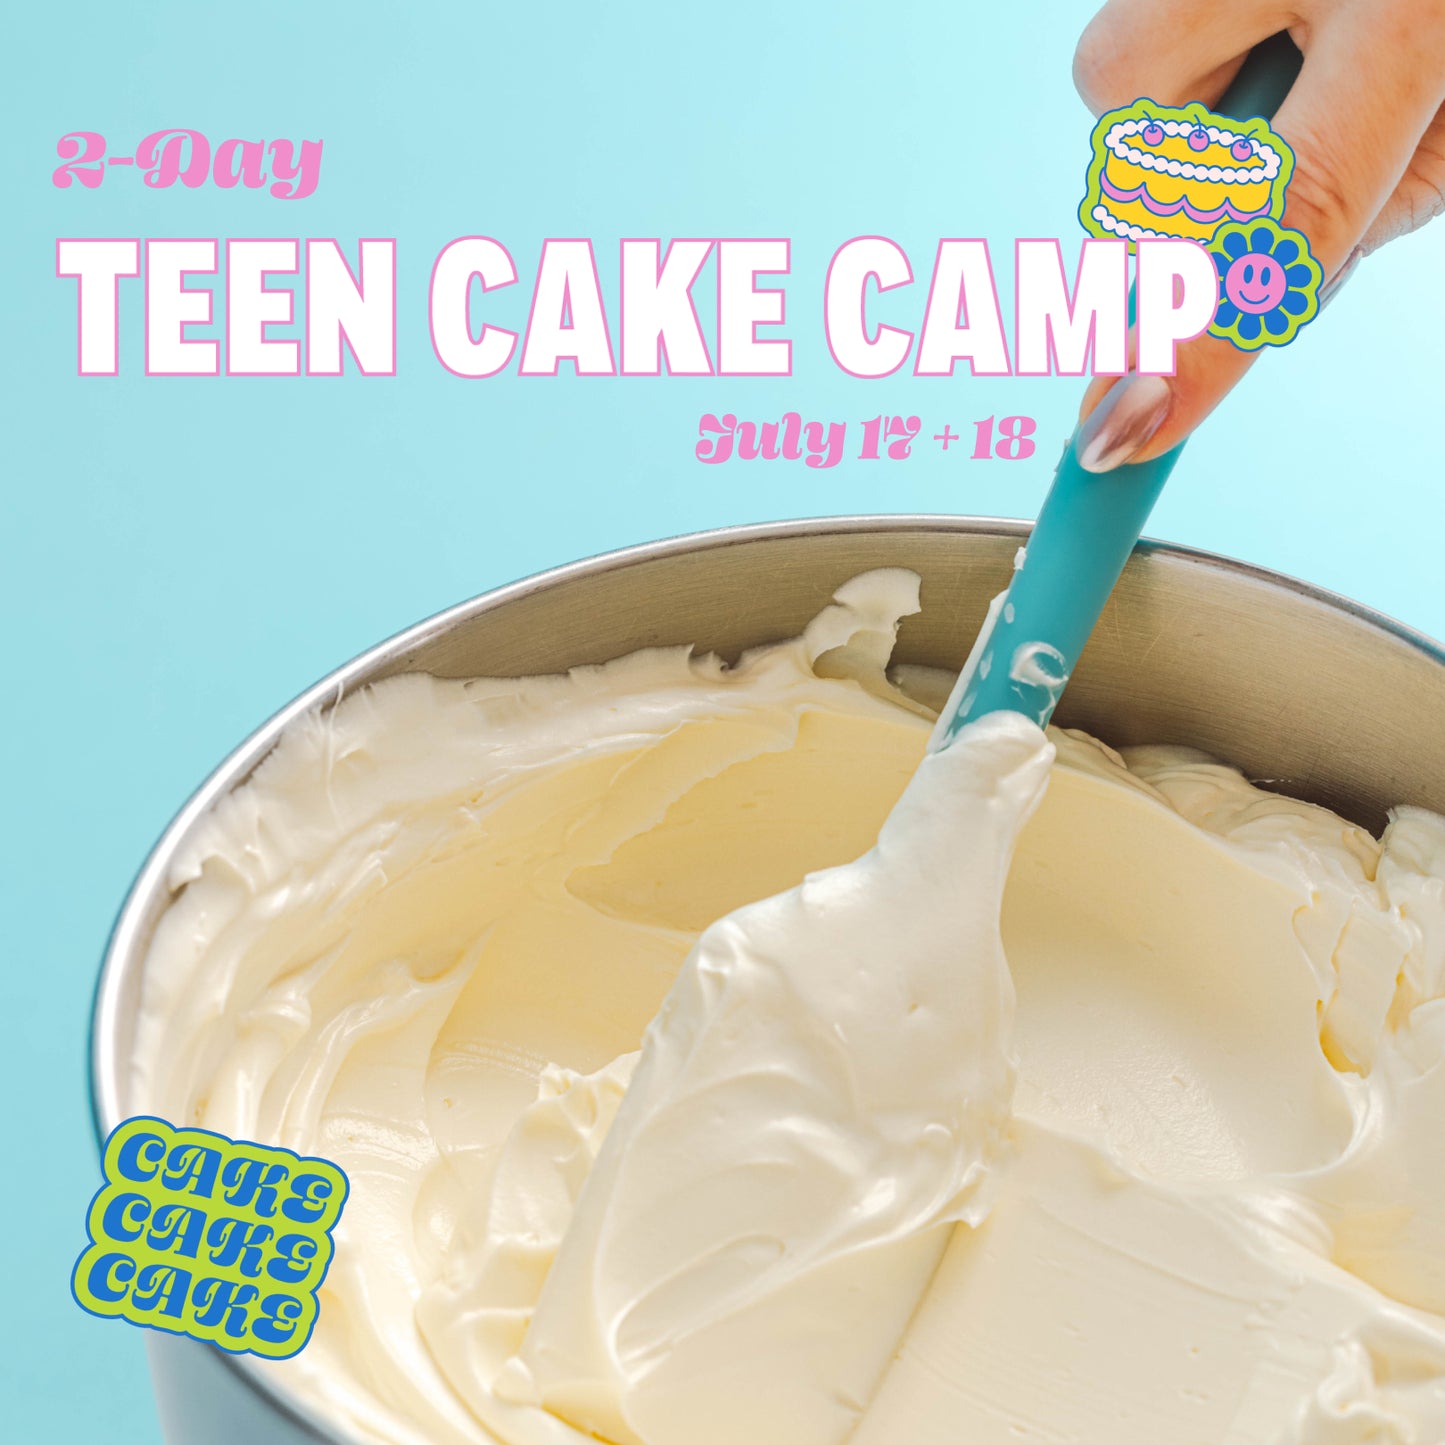 2-Day Teen Cake Camp - Wednesday, July 17 + Thursday, July 18